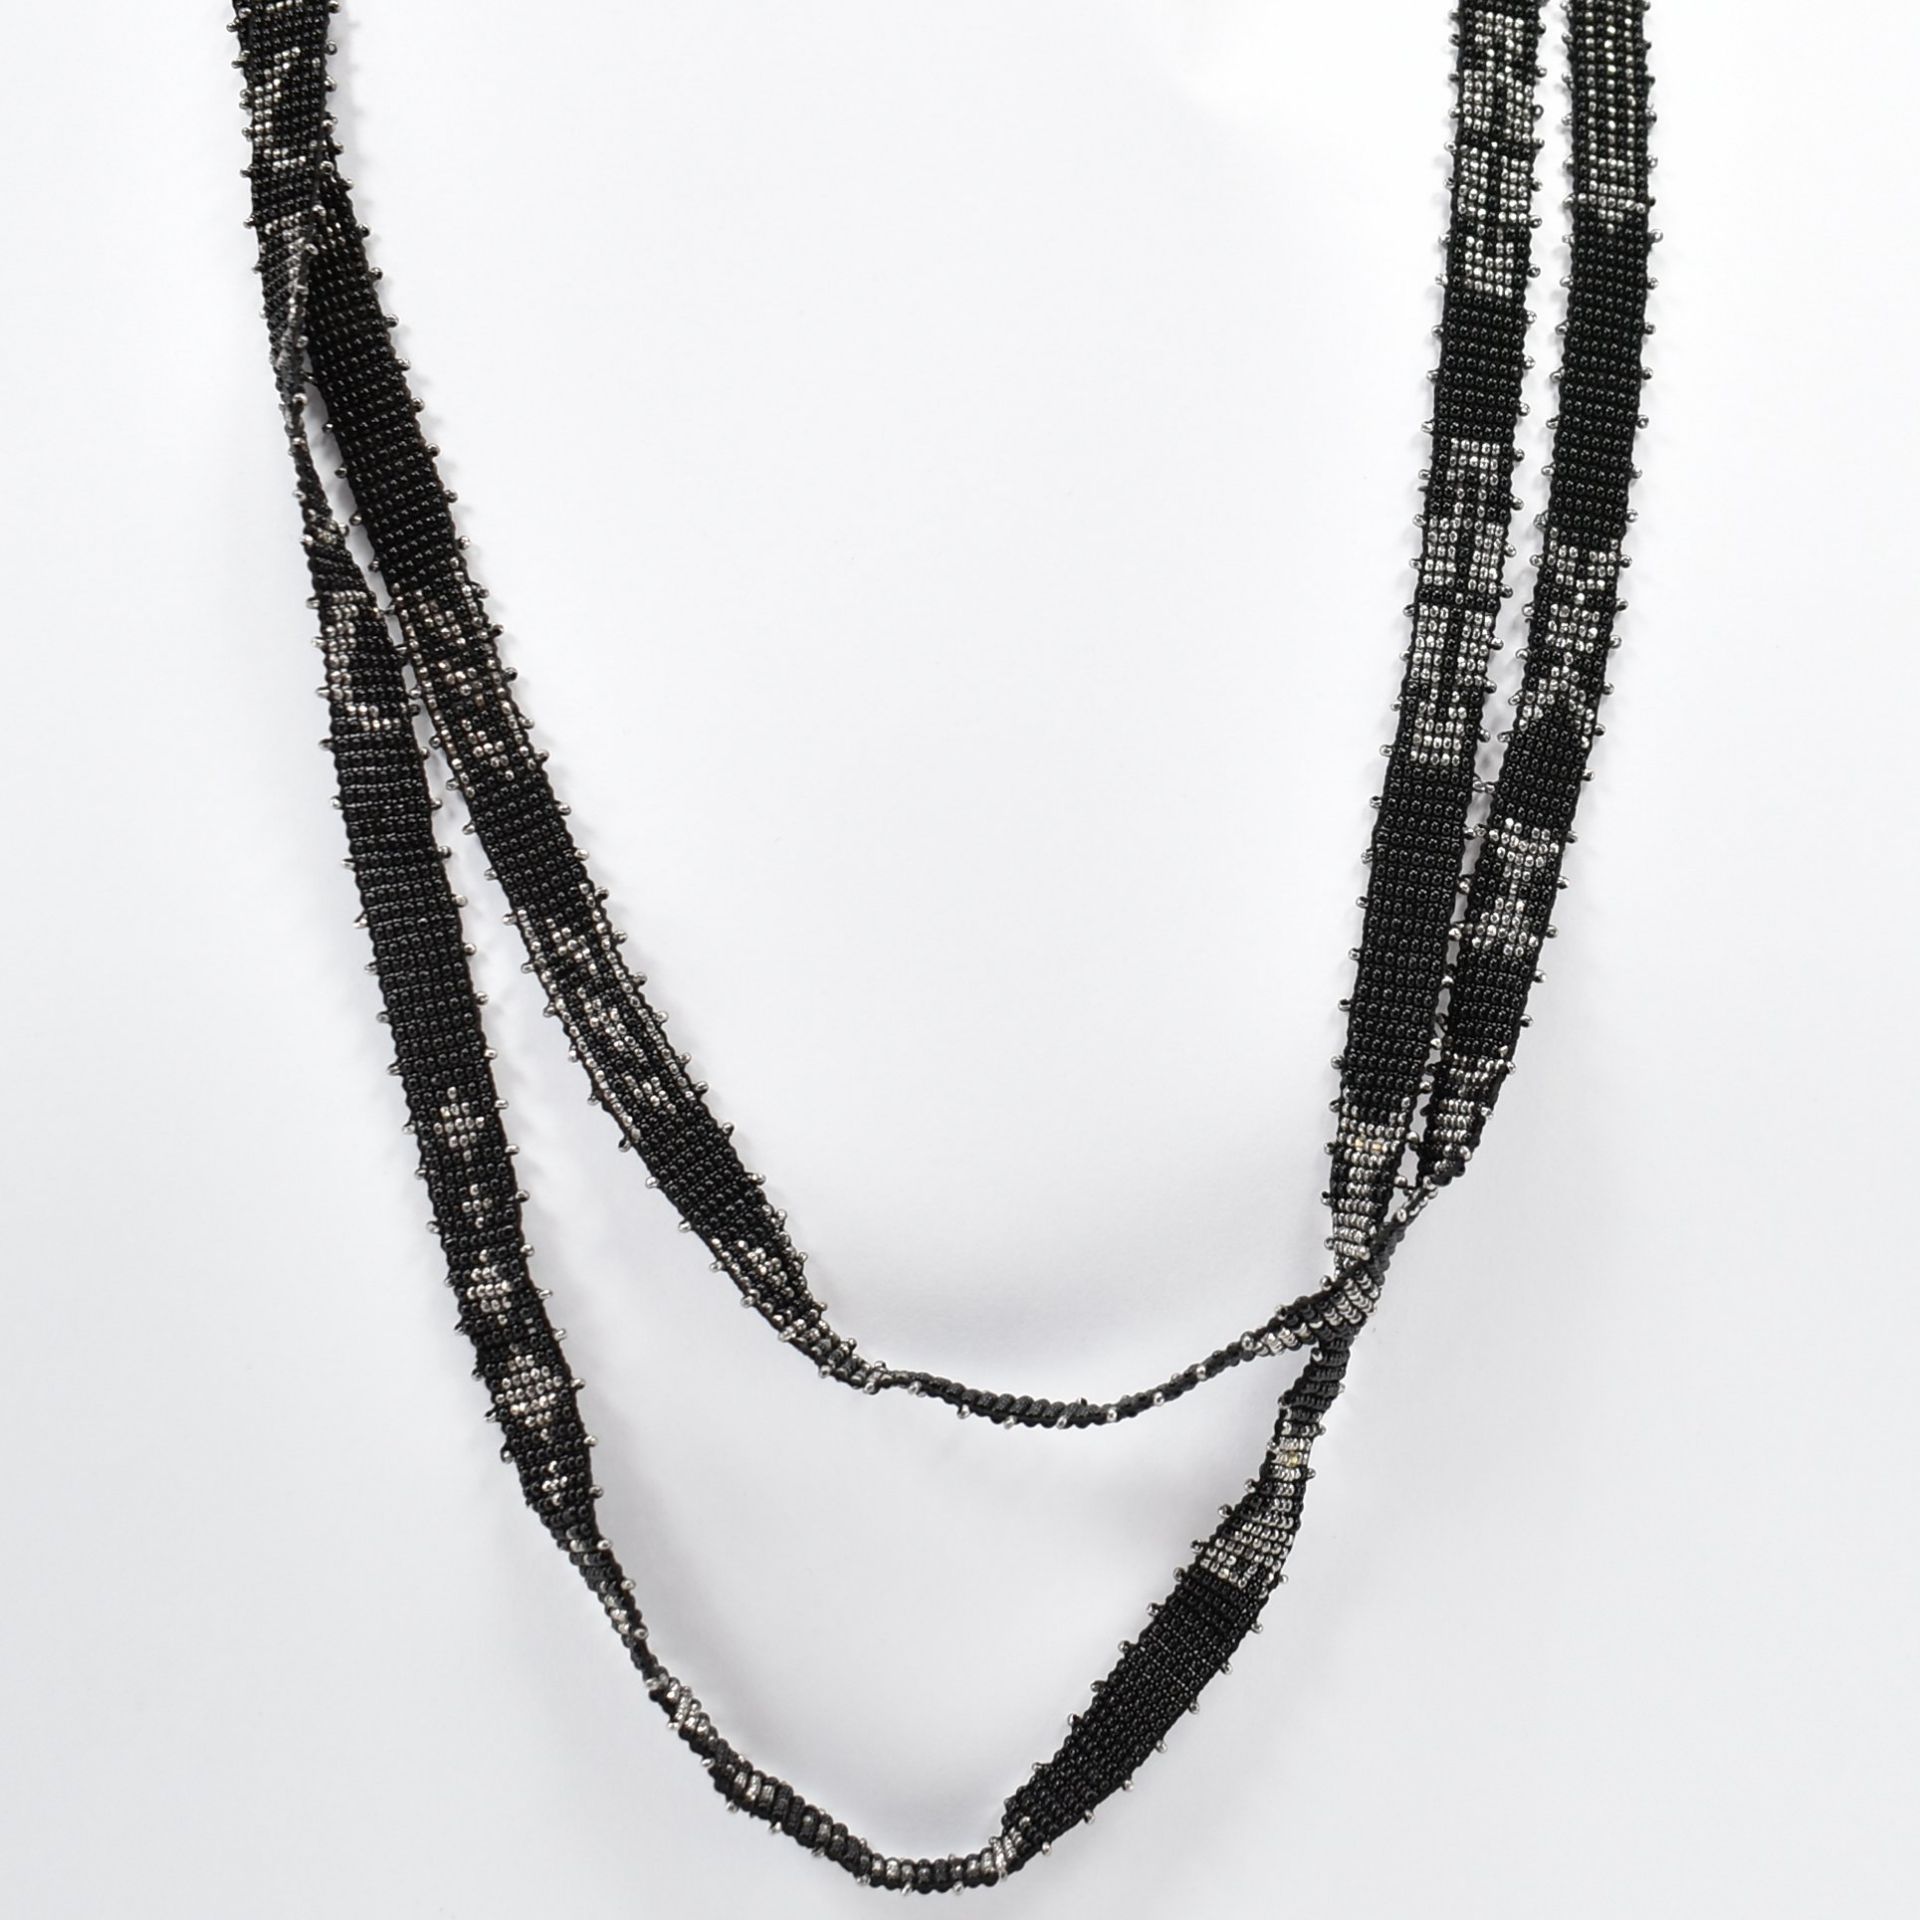 FOUR ART DECO MICRO BEAD NECKLACES - Image 8 of 10